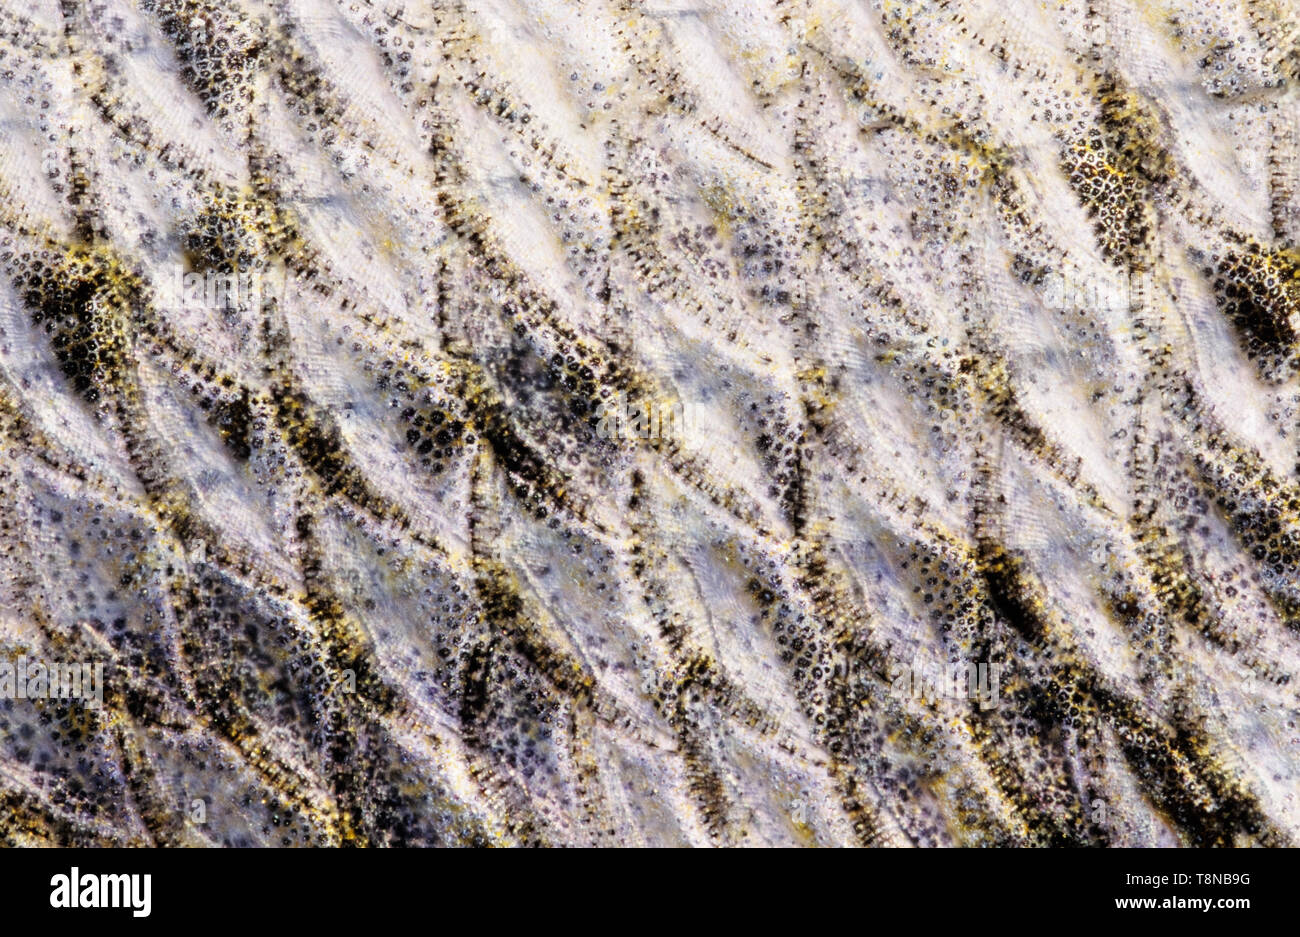 Fish (Zander/Pike-perch, Sander lucioperca) scales close-up.  Image looks a bit soft due to the epidermal mucus covering the scales. Stock Photo